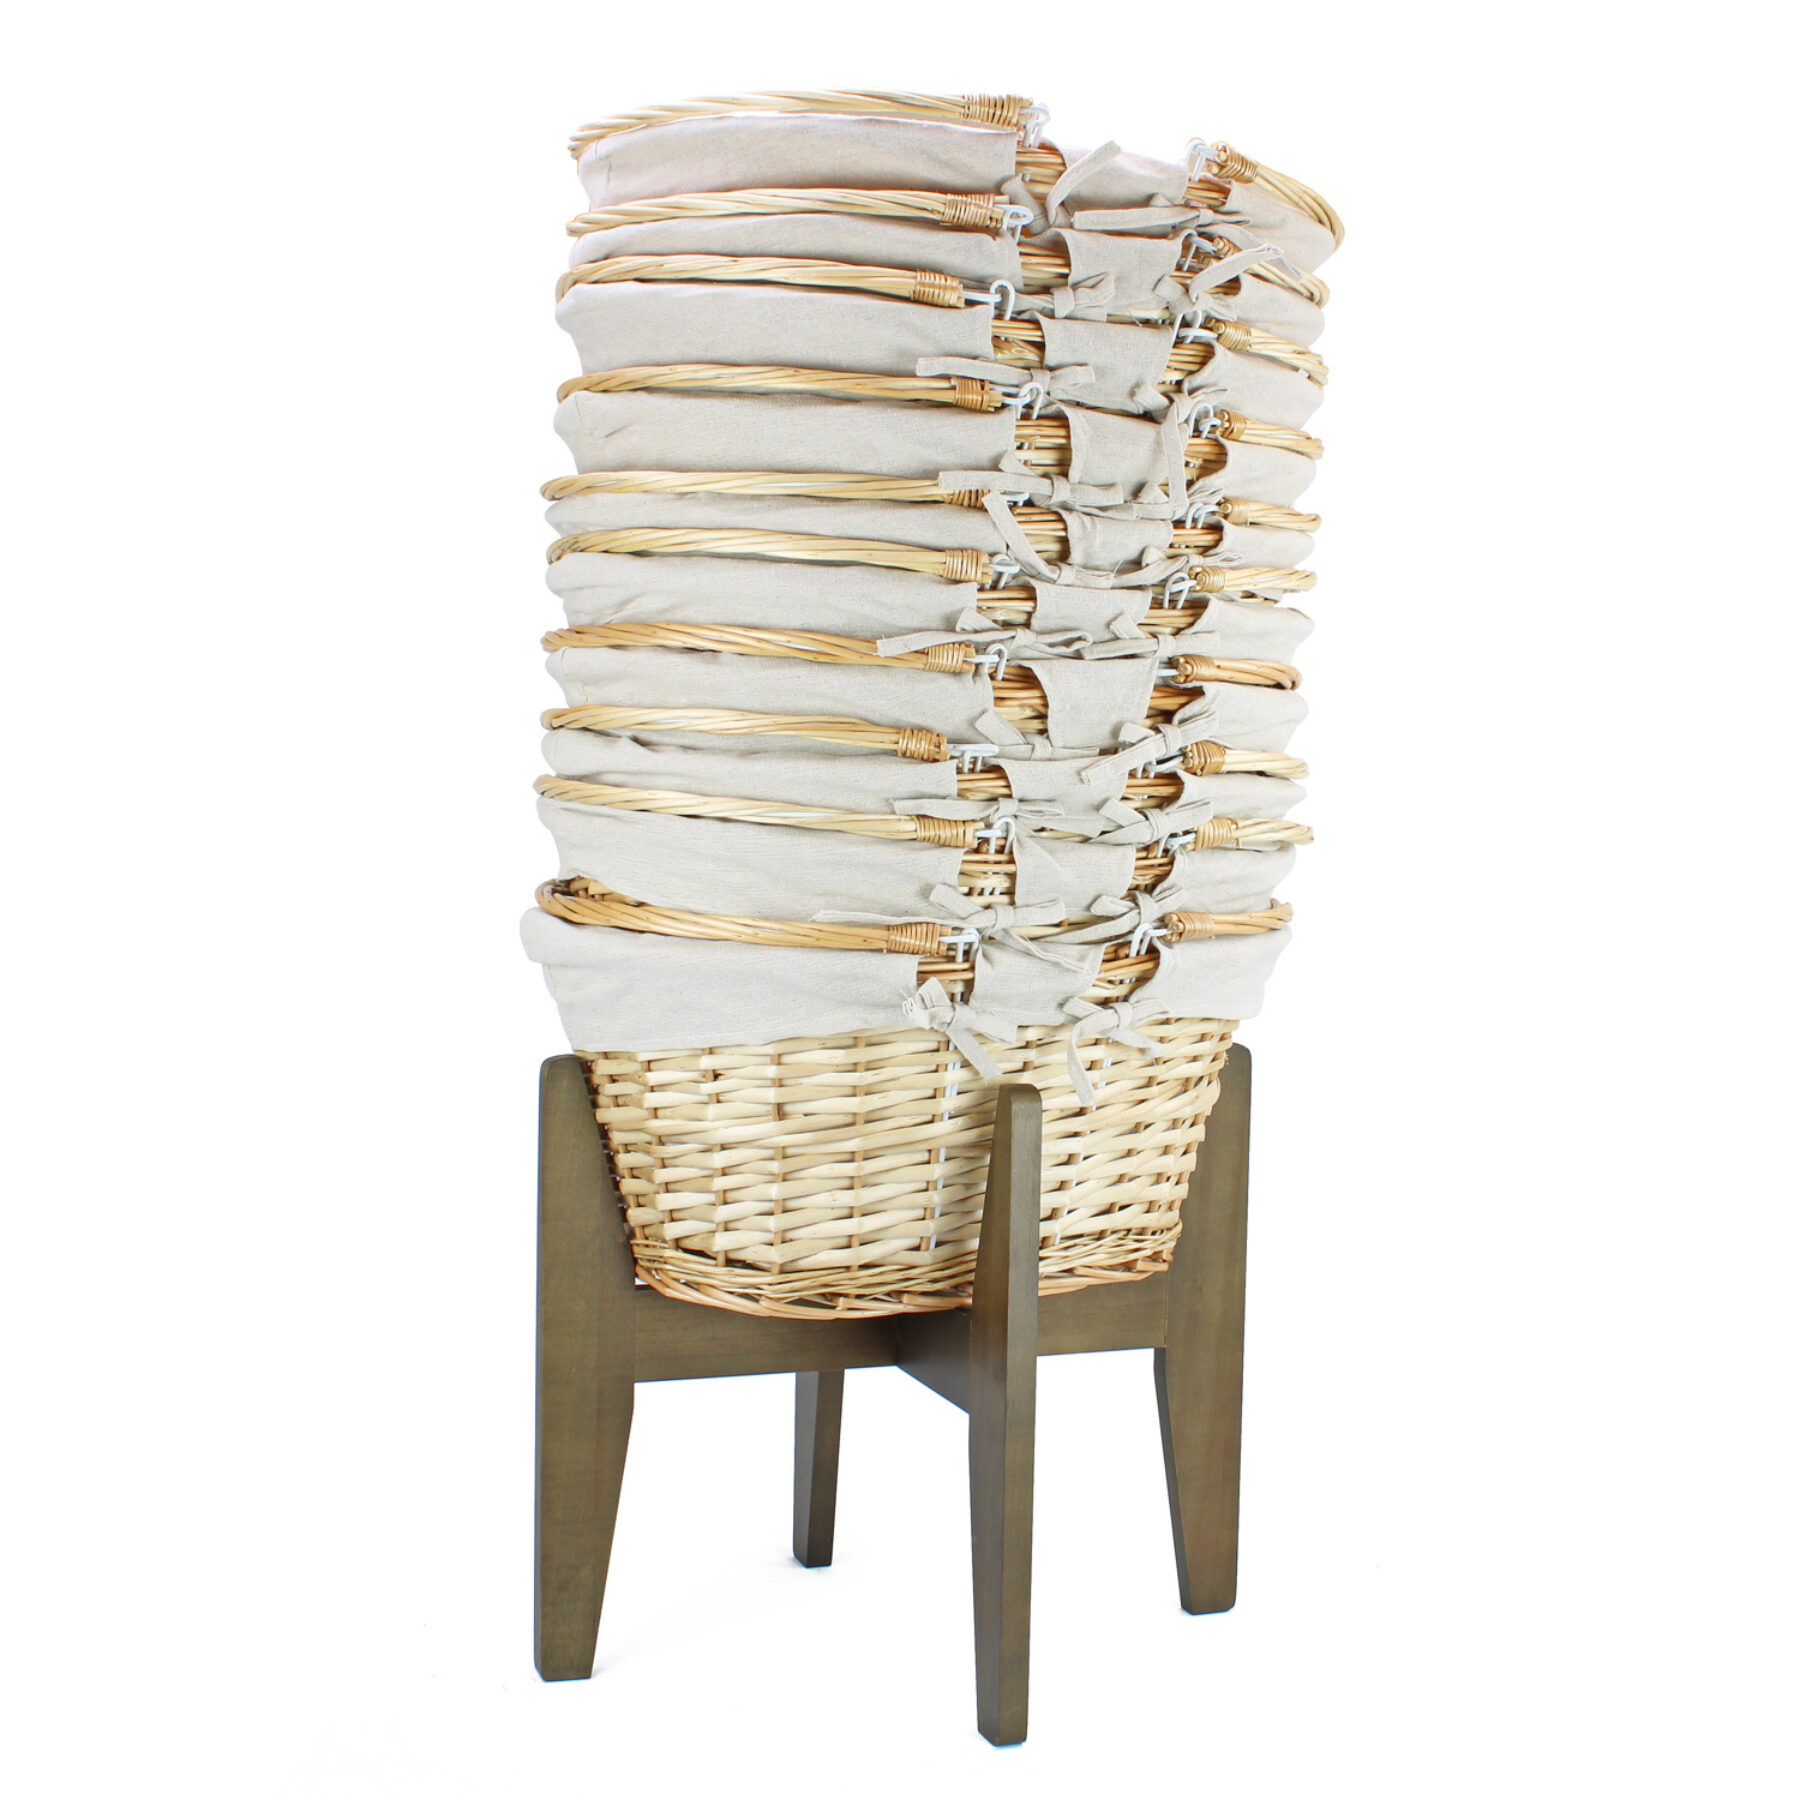 10 Large Shopping Baskets & Stand - Light